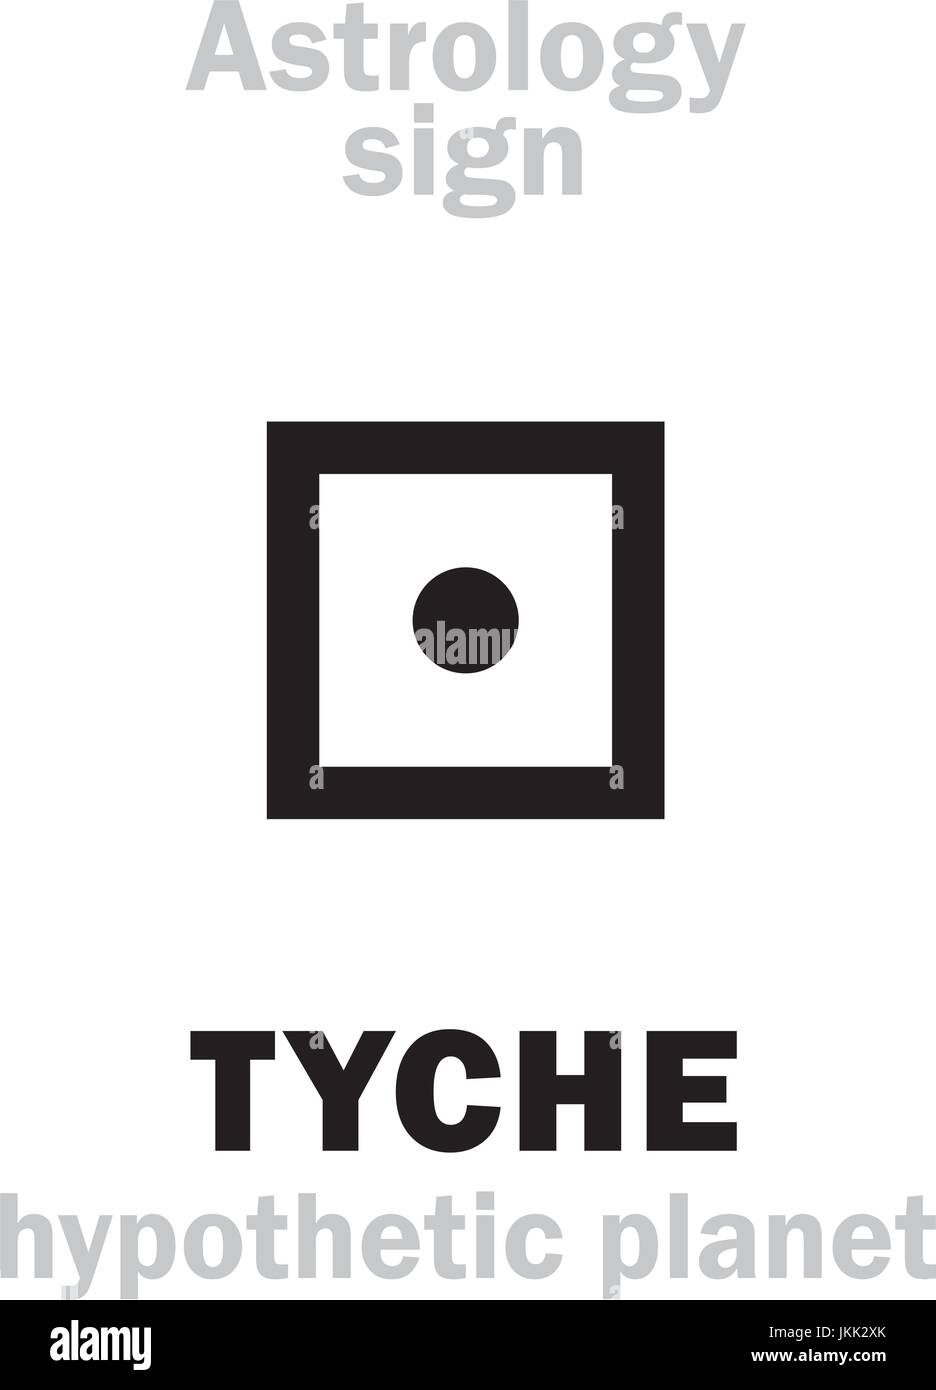 Astrology Alphabet: TYCHE, hypothetic super-distant planet, or star-satellite of Sun. Hieroglyphics character sign (single symbol). Stock Vector